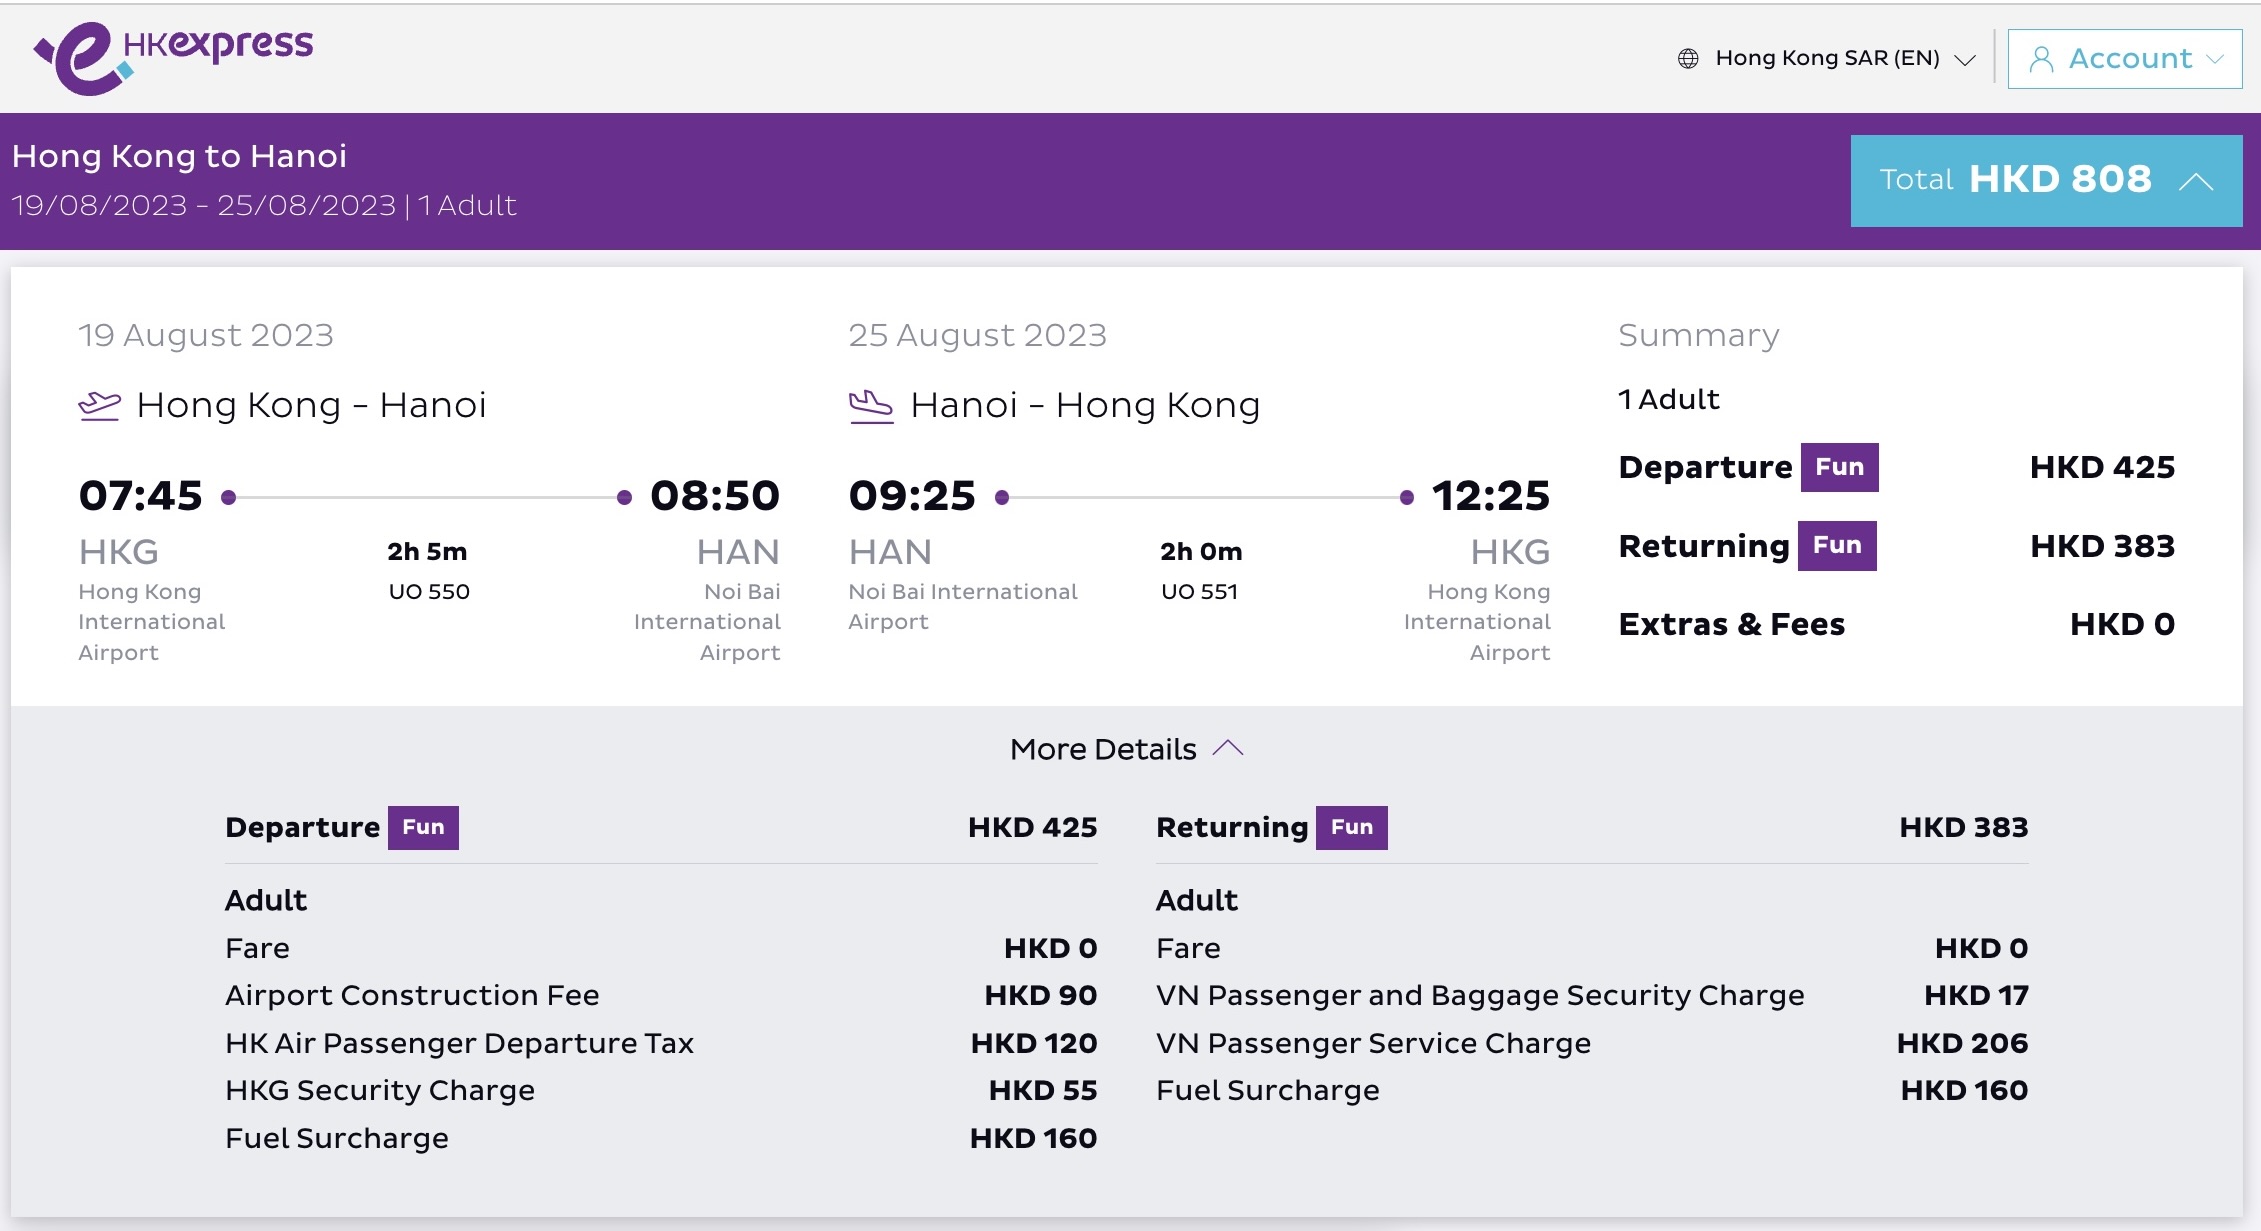 A screenshot from the HK Express website showing that passengers will have to pay a minimum of HK$808 by way of taxes, fees, and surcharges on tickets between Hong Kong and Hanoi.